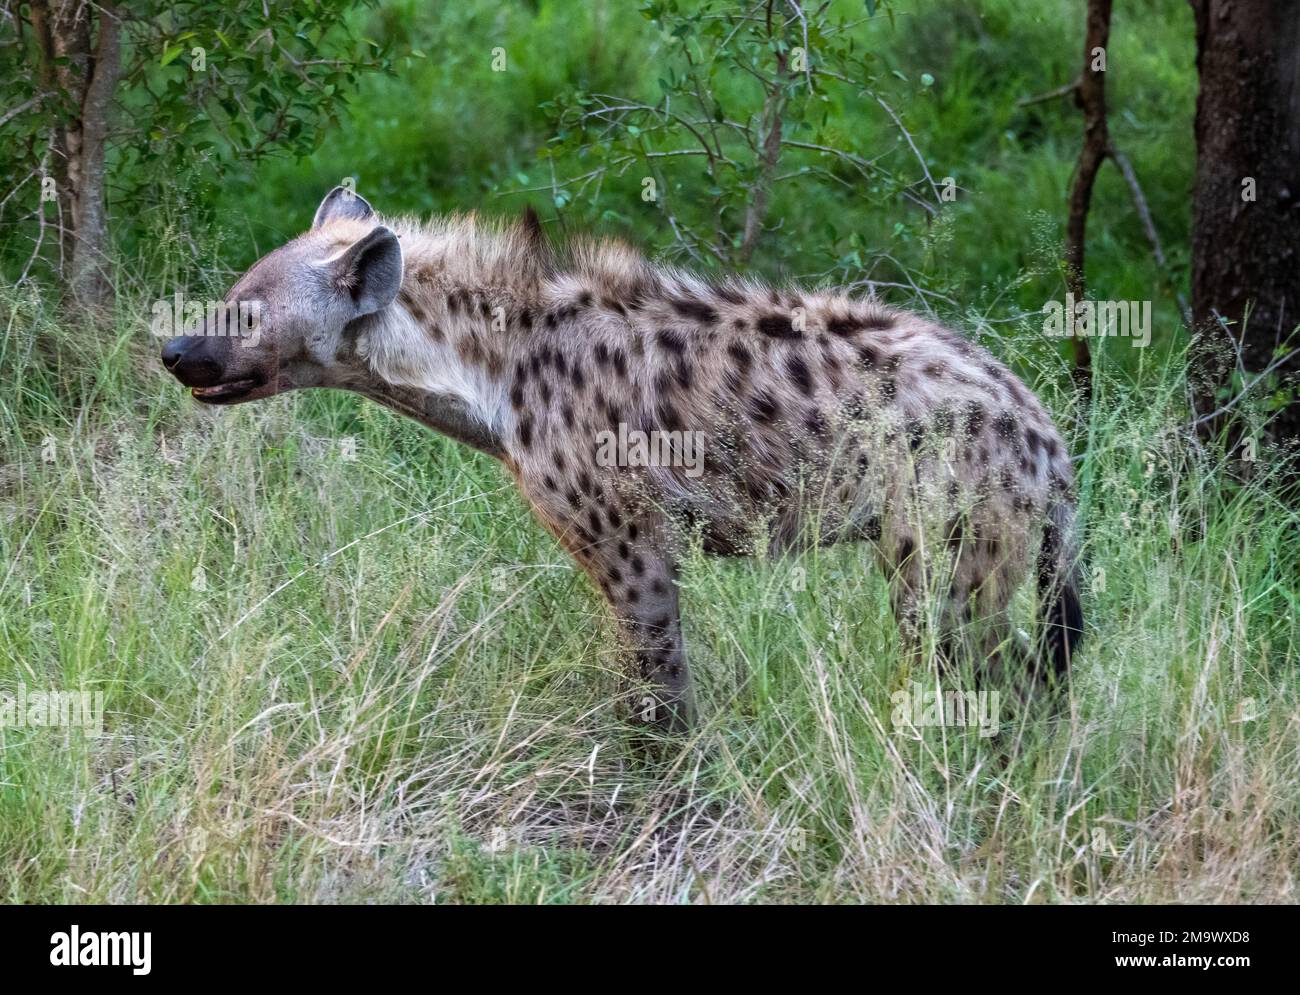 A Spotted Hyena (Crocuta crocuta), or Laughing Hyena, in the bush. Kruger National Park, South Africa. Stock Photo